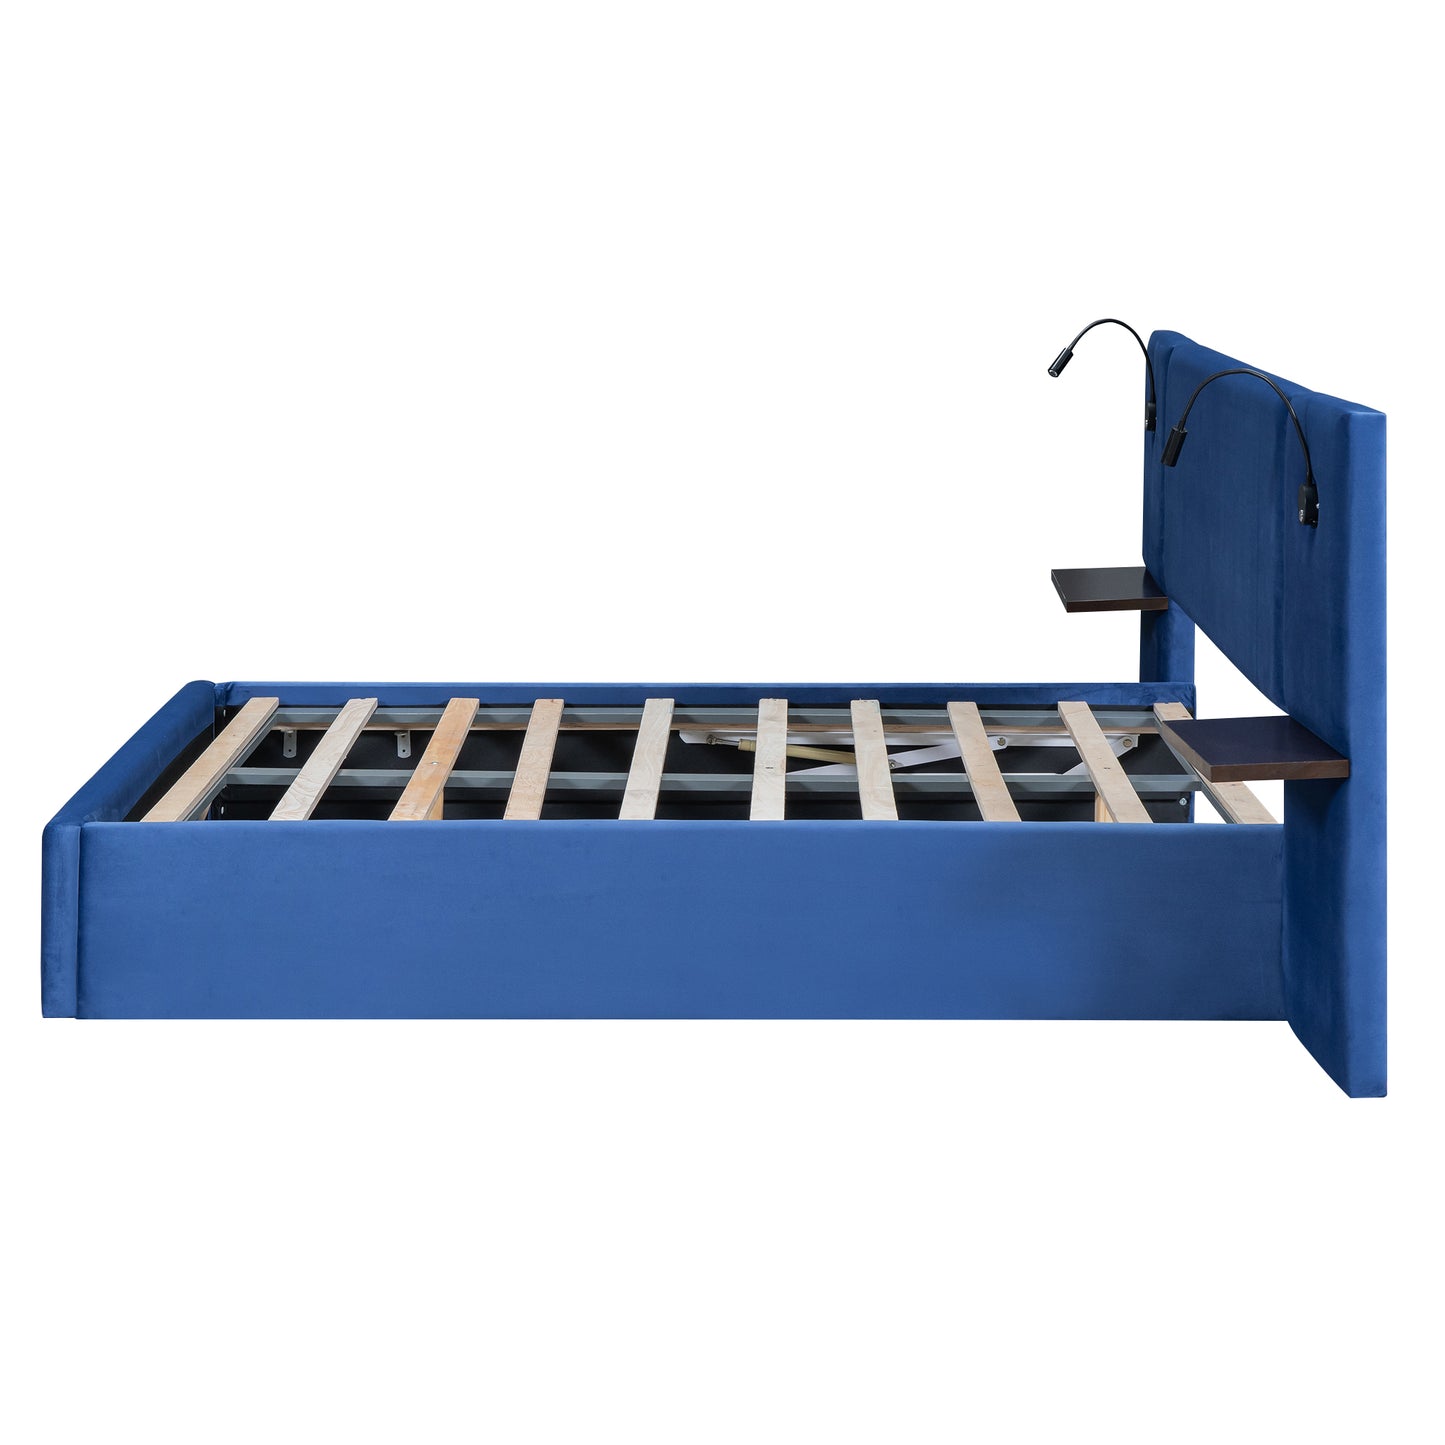 Full Size Storage Upholstered Hydraulic Platform Bed with 2 Shelves, 2 Lights and USB, Blue